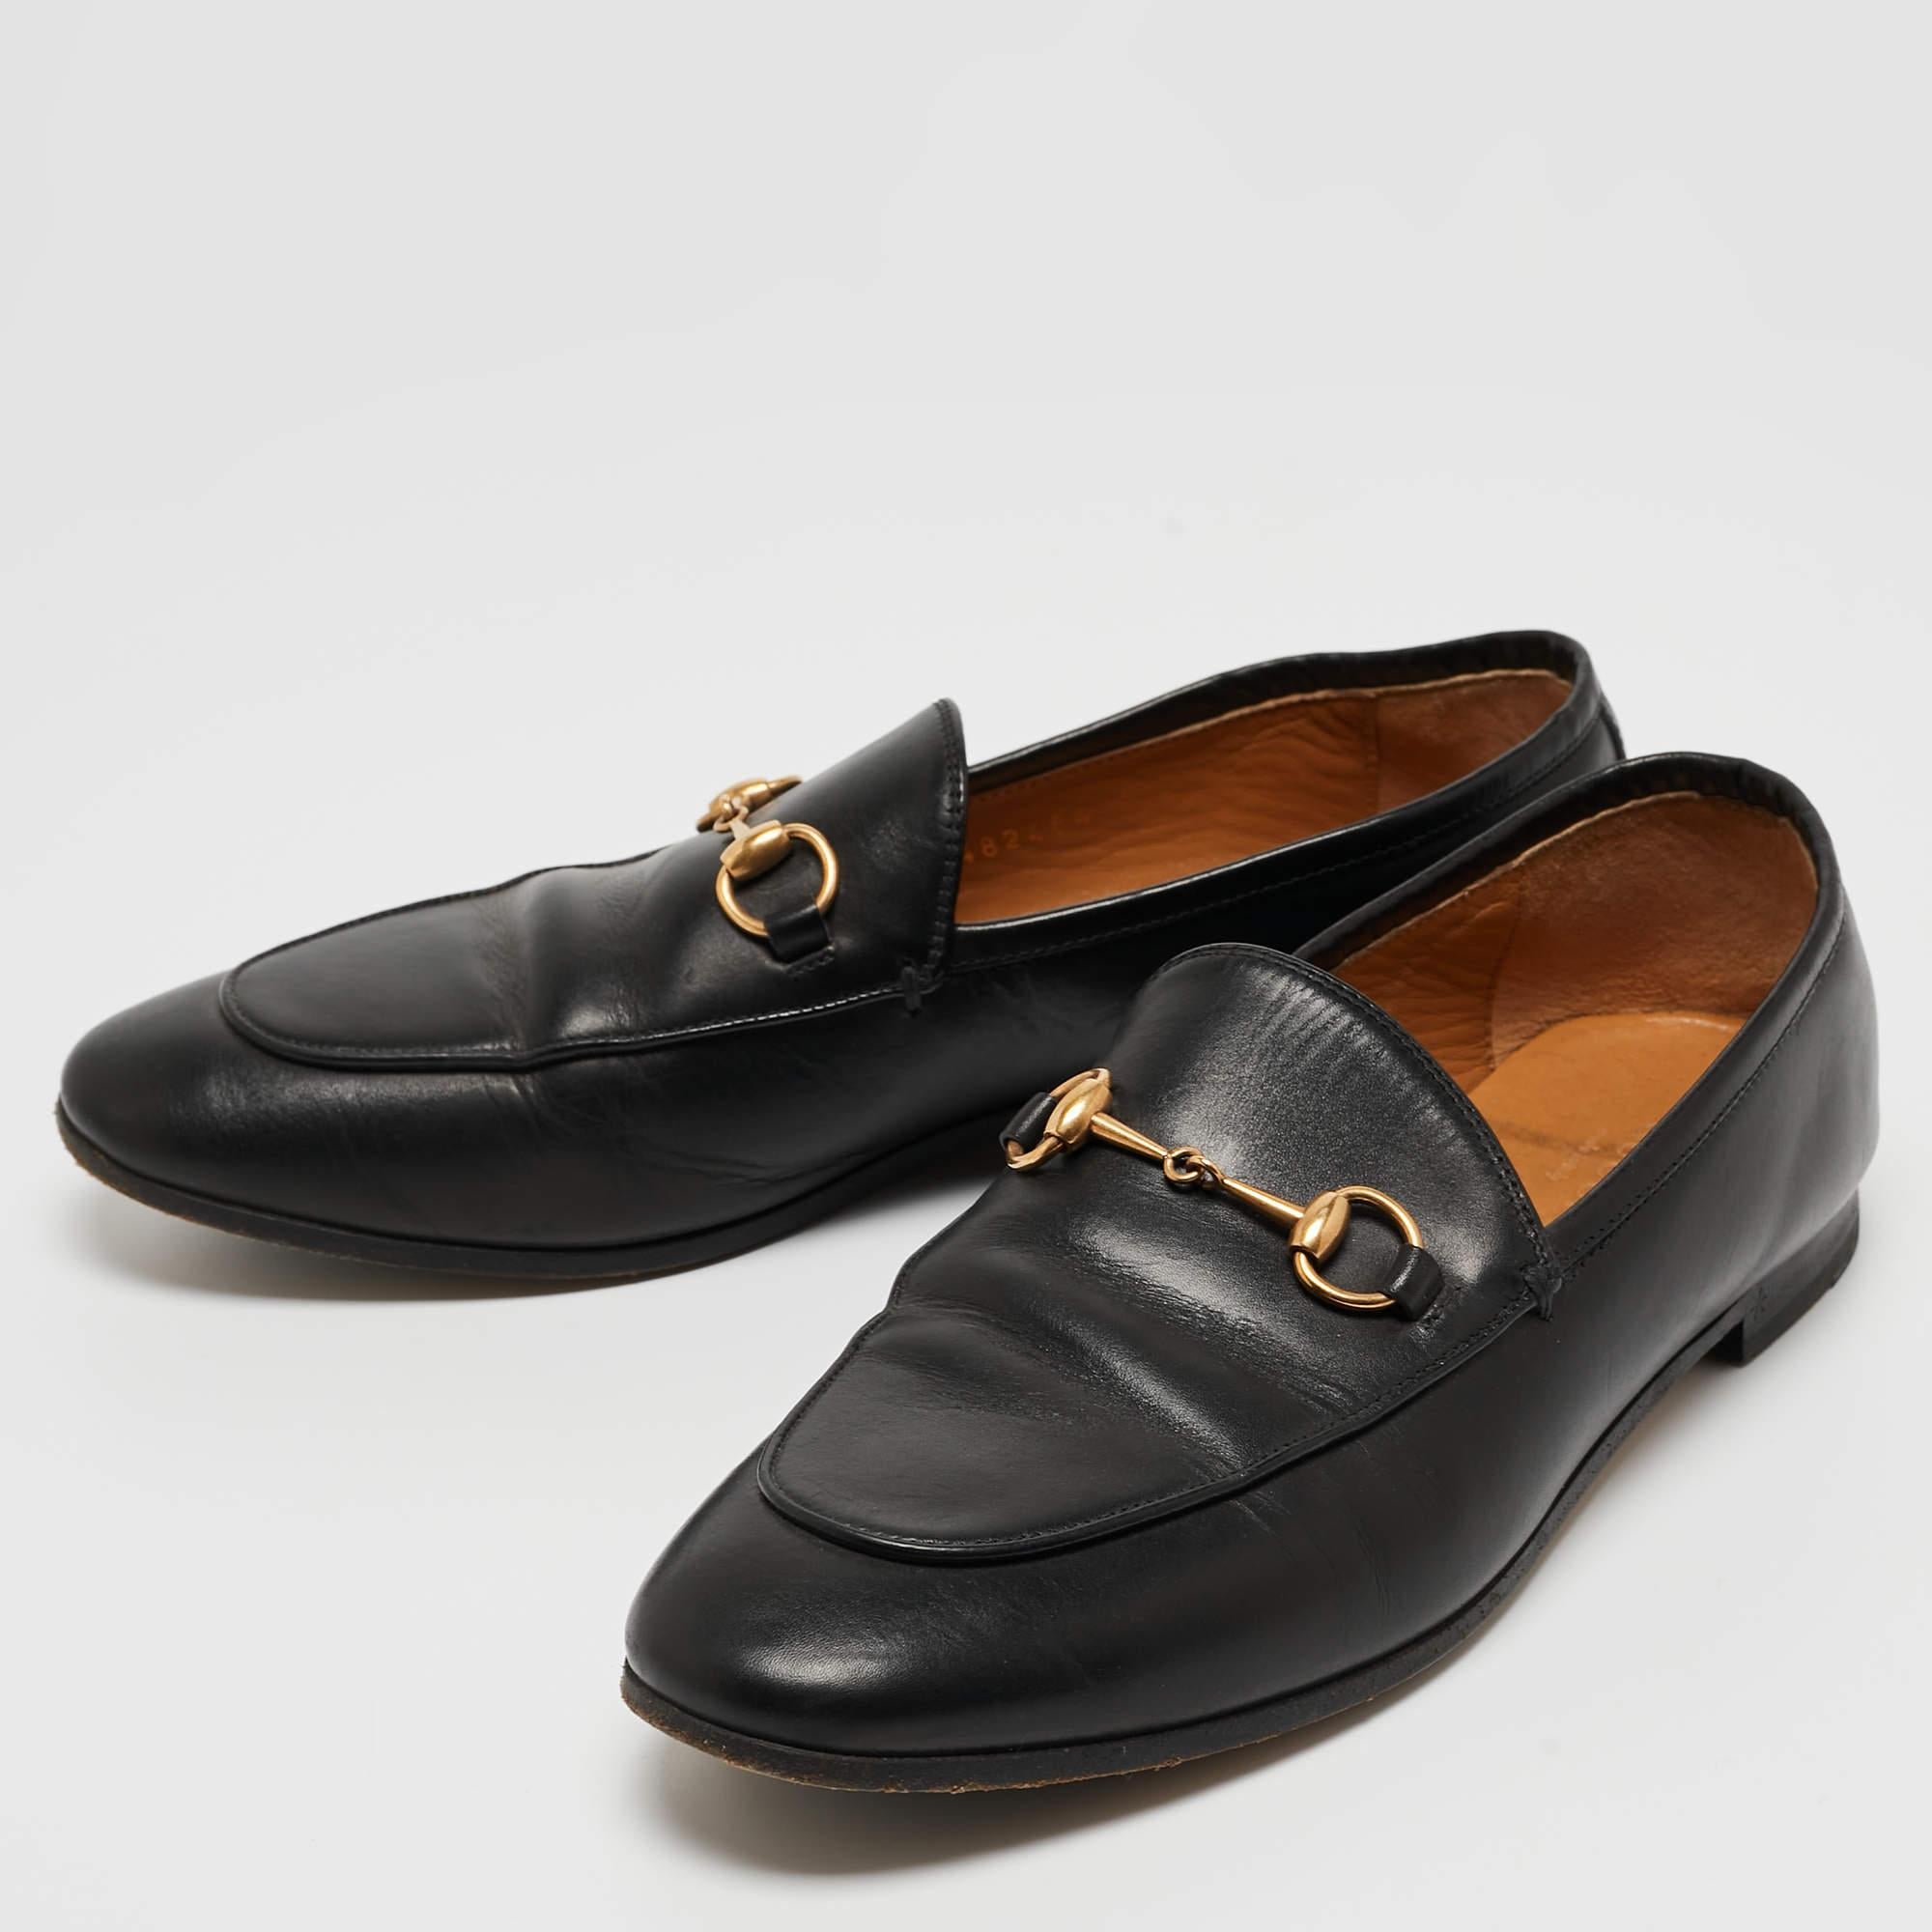 Gucci Black Leather Jordaan Loafers Size 38.5 2